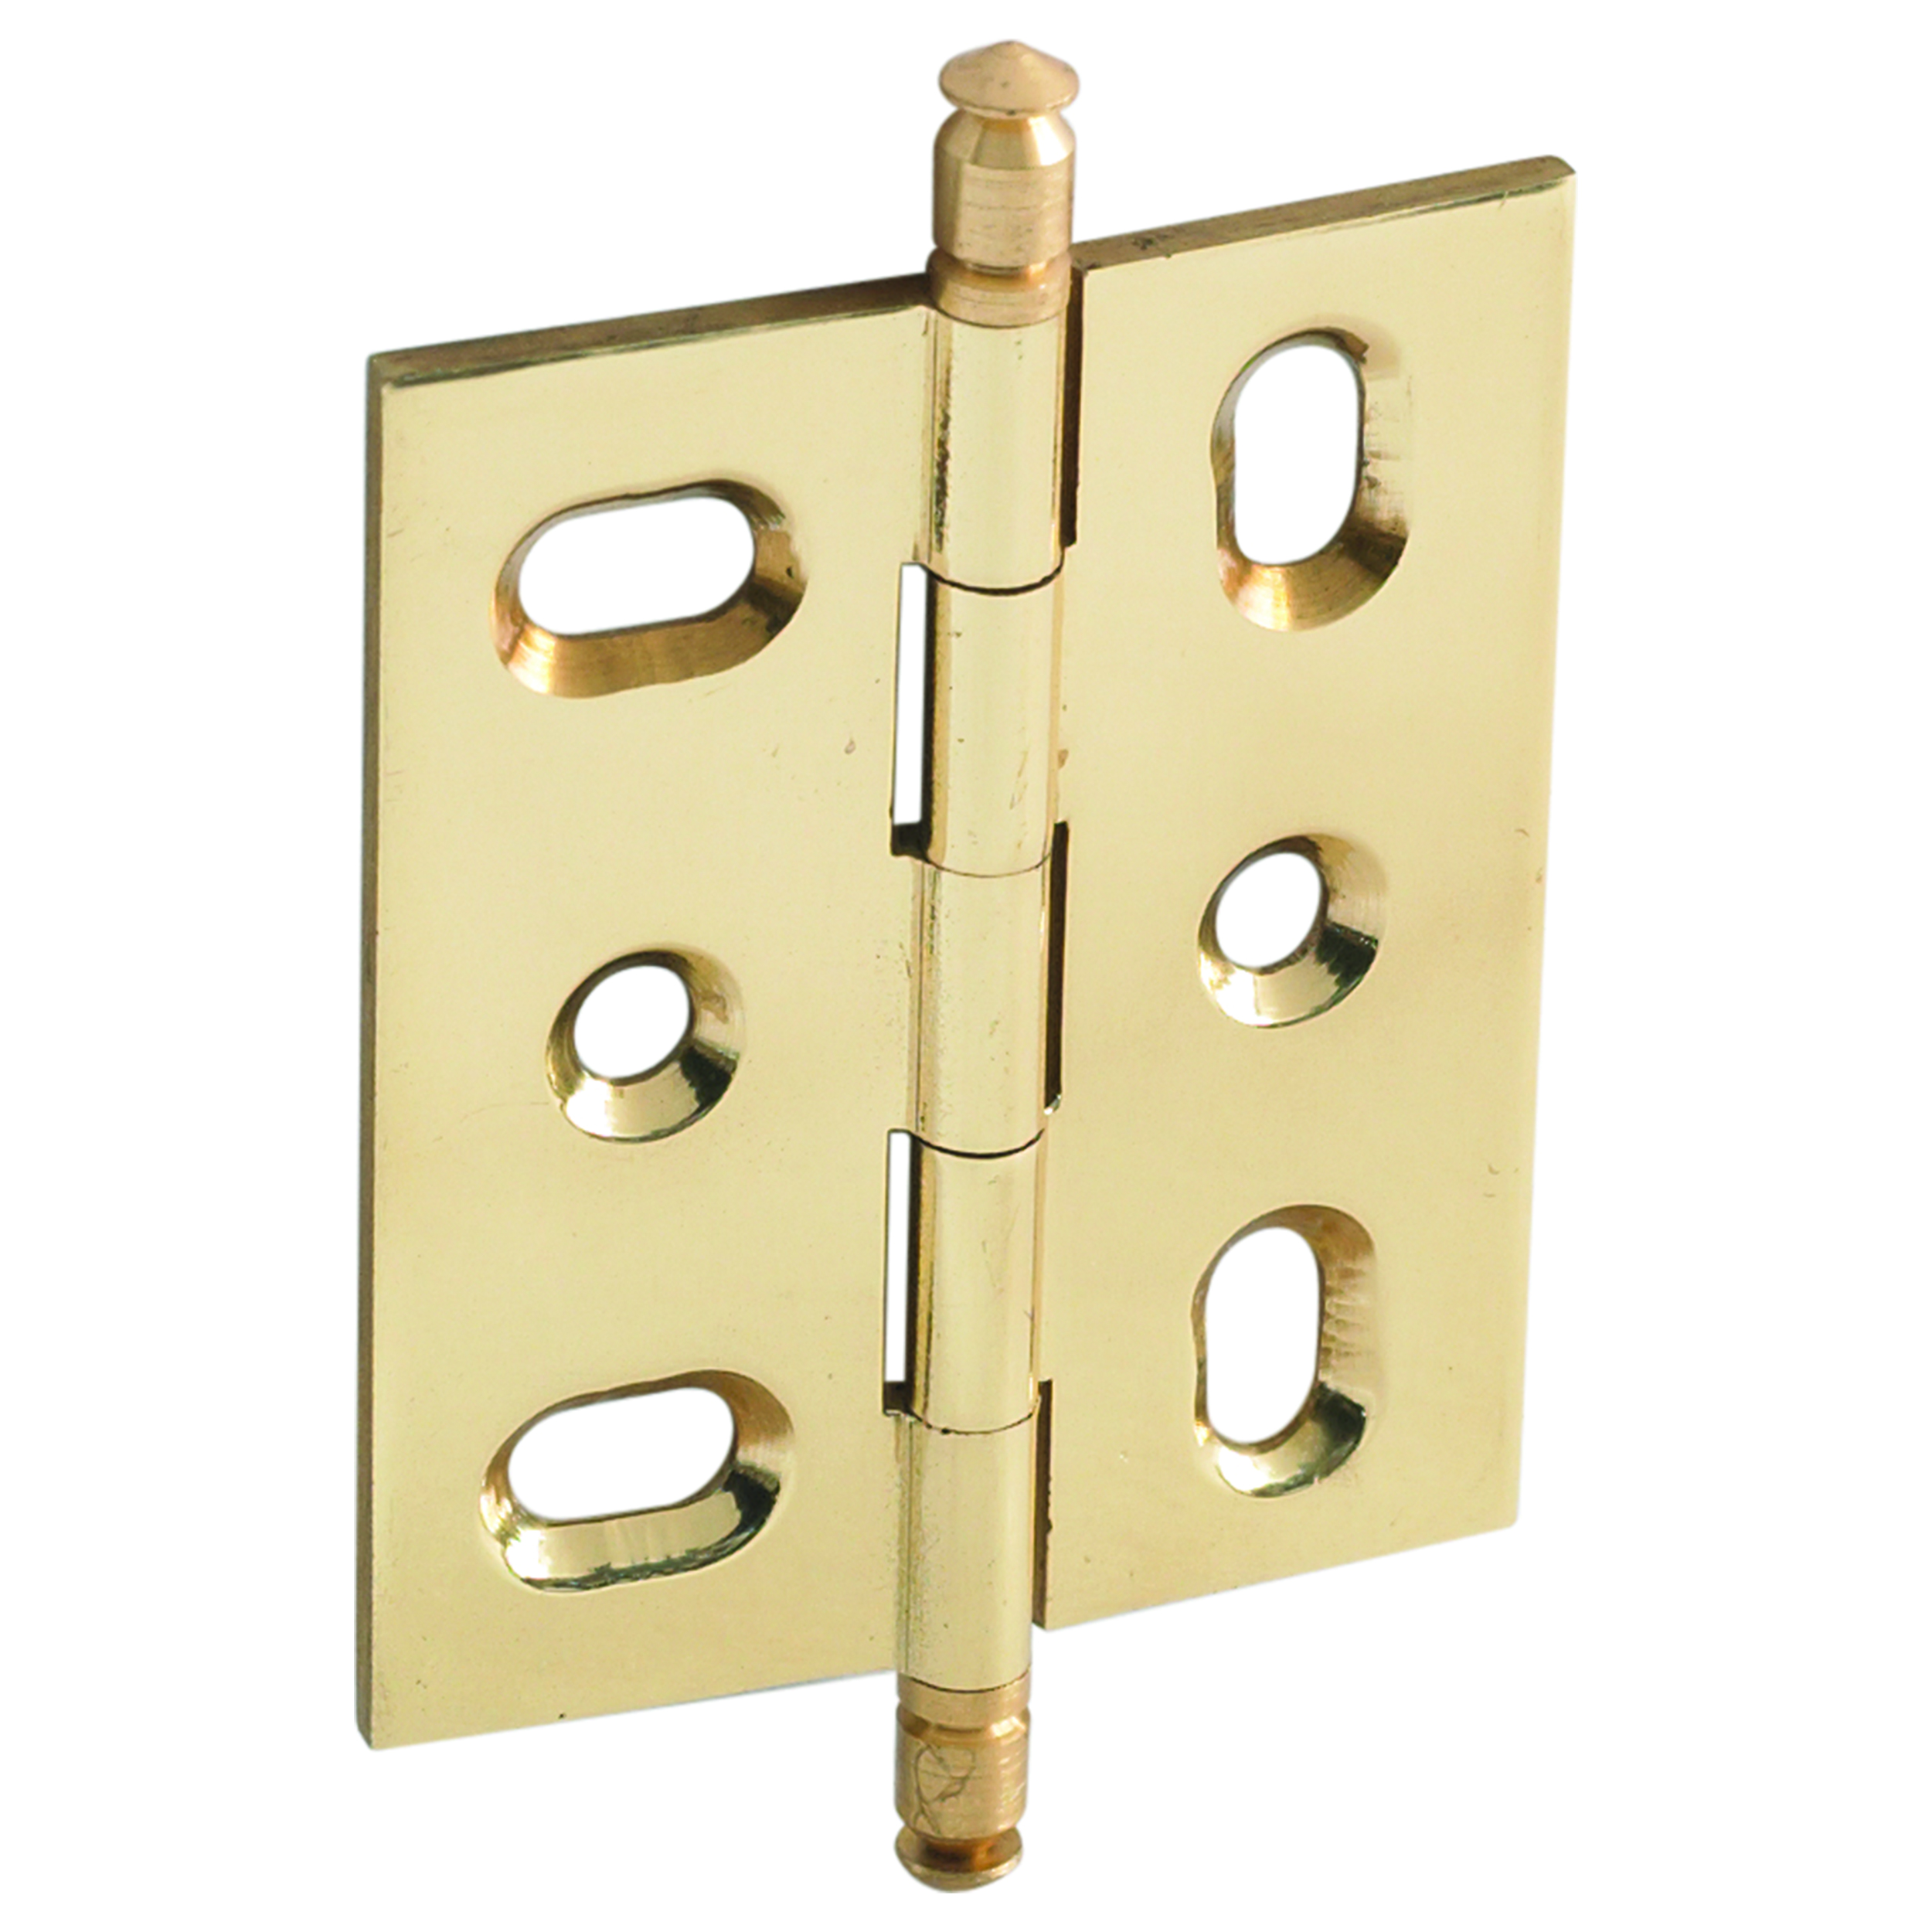 Mortised Decorative Solid Brass Butt Hinge With Finial In Polished Brass - Model# 354.22.831